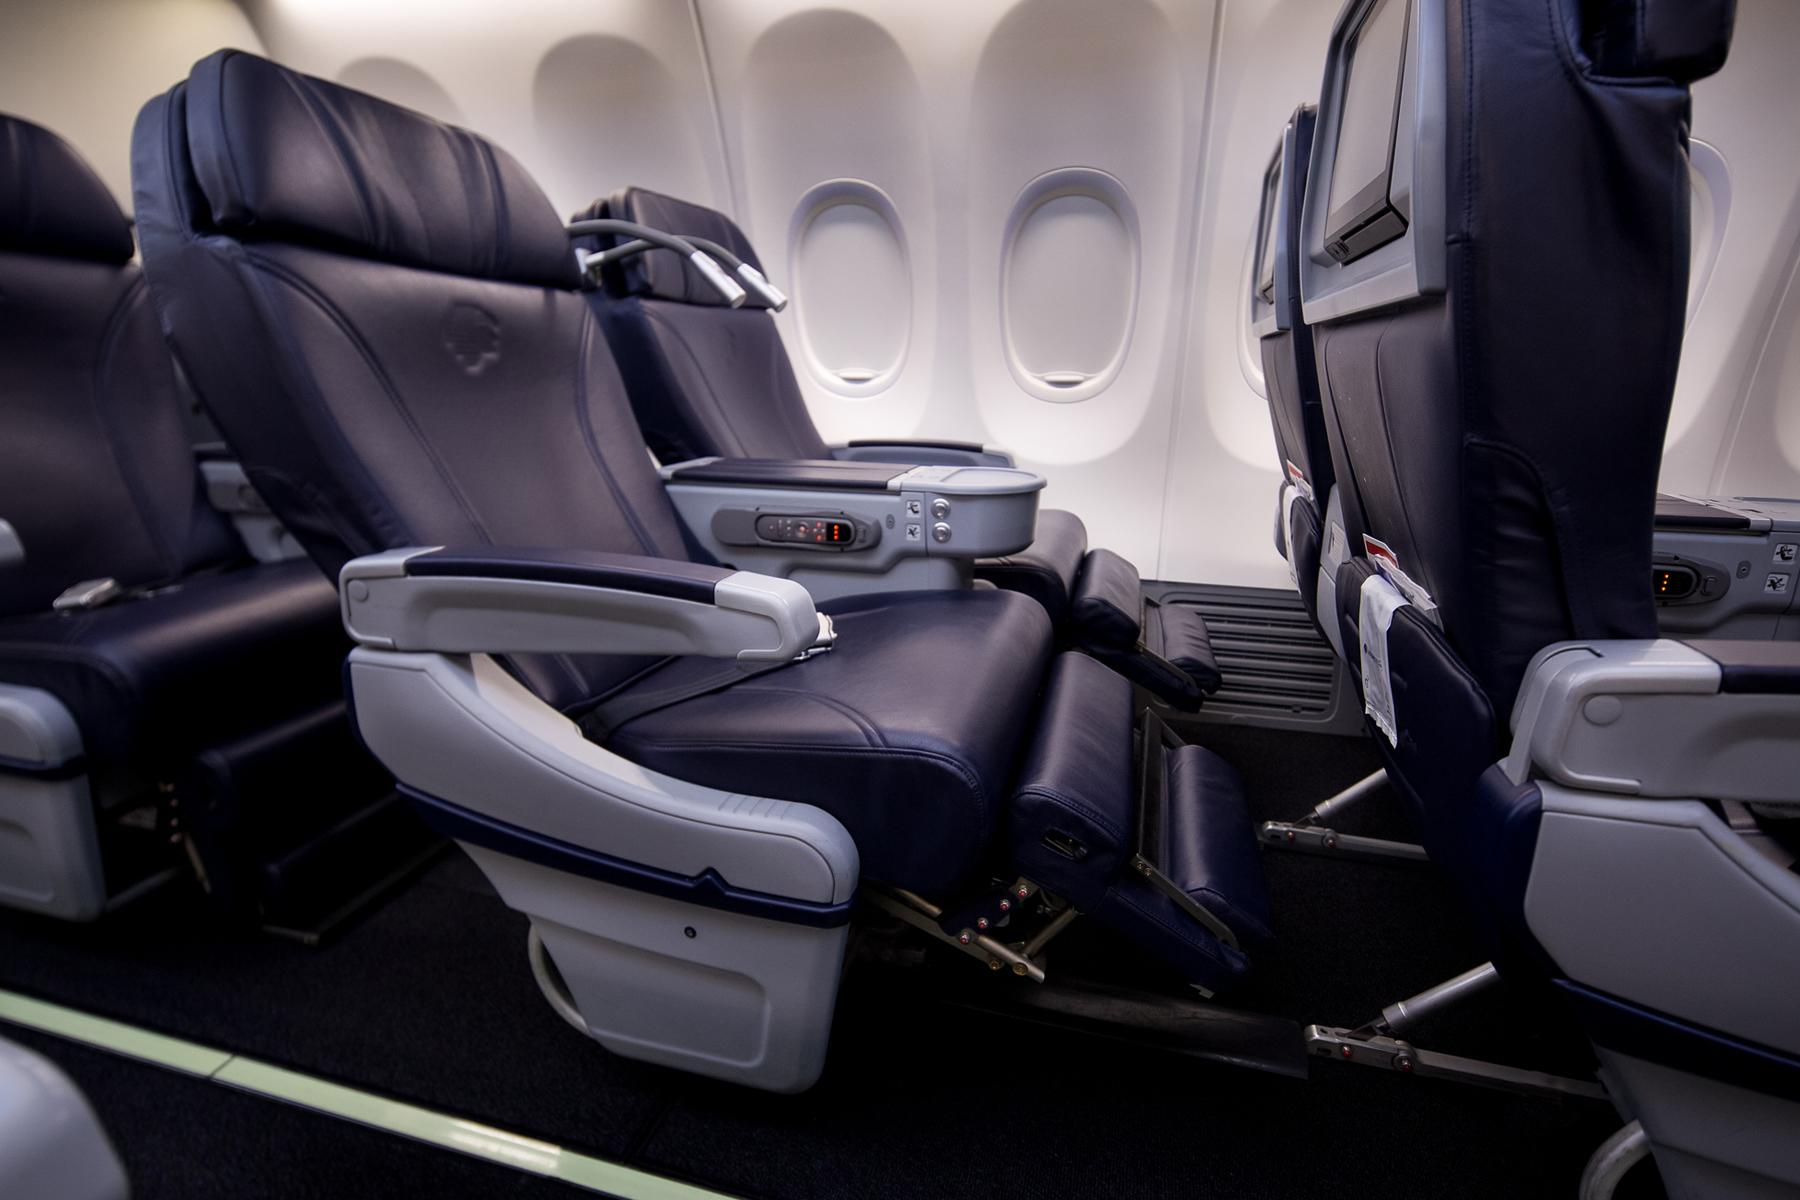 How To Find Cheap Premium Class Or Business Class Flights